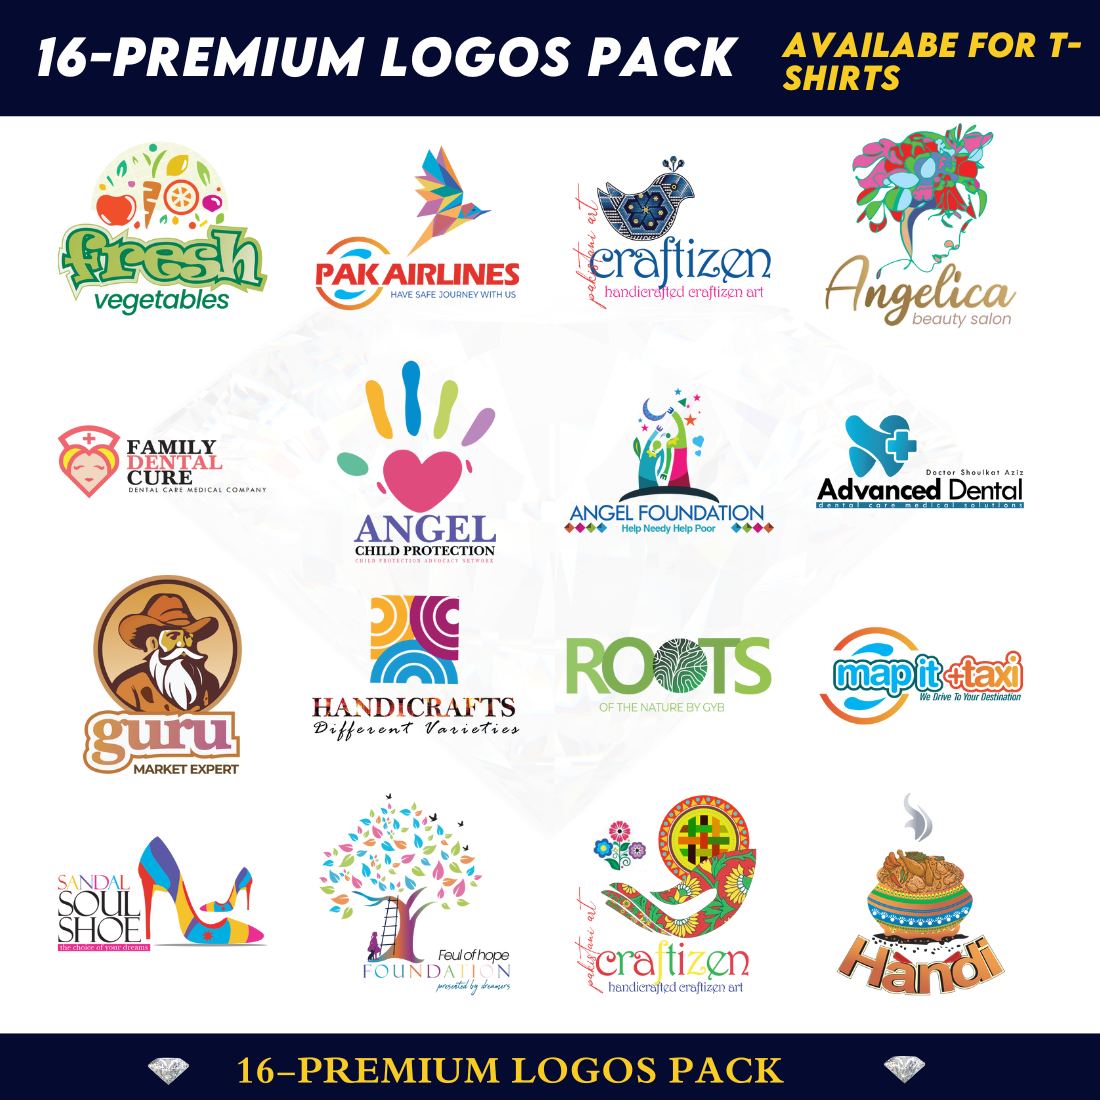 Business Premium 16- Logos Bundle - Only $29 cover image.